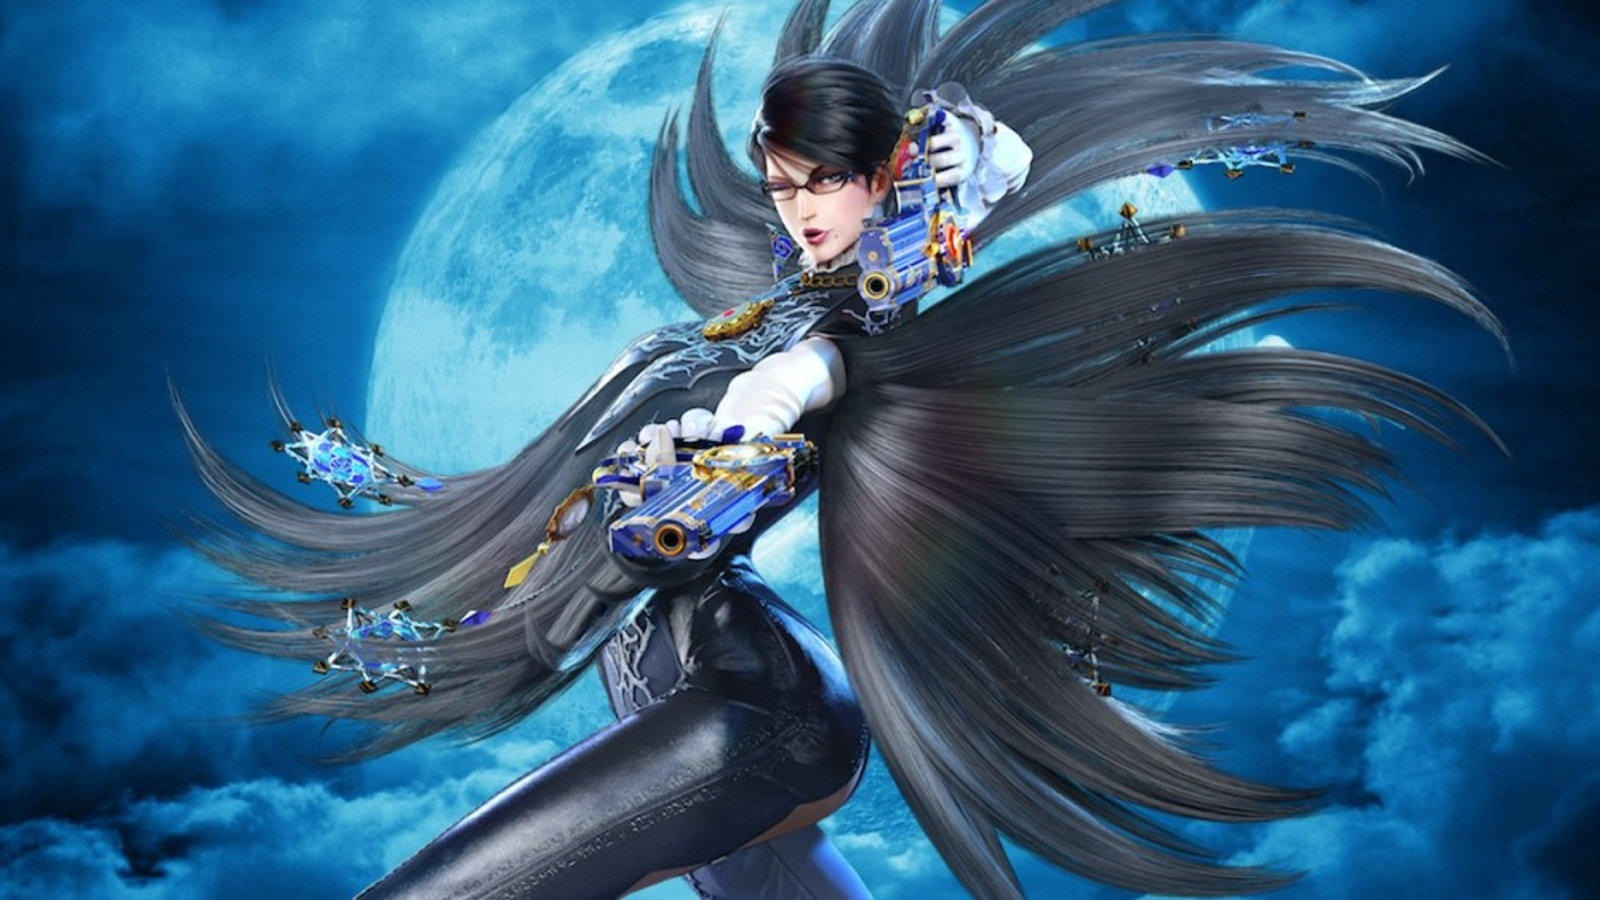 Kamiya says he's forever indebted to Nintendo for Bayonetta 3